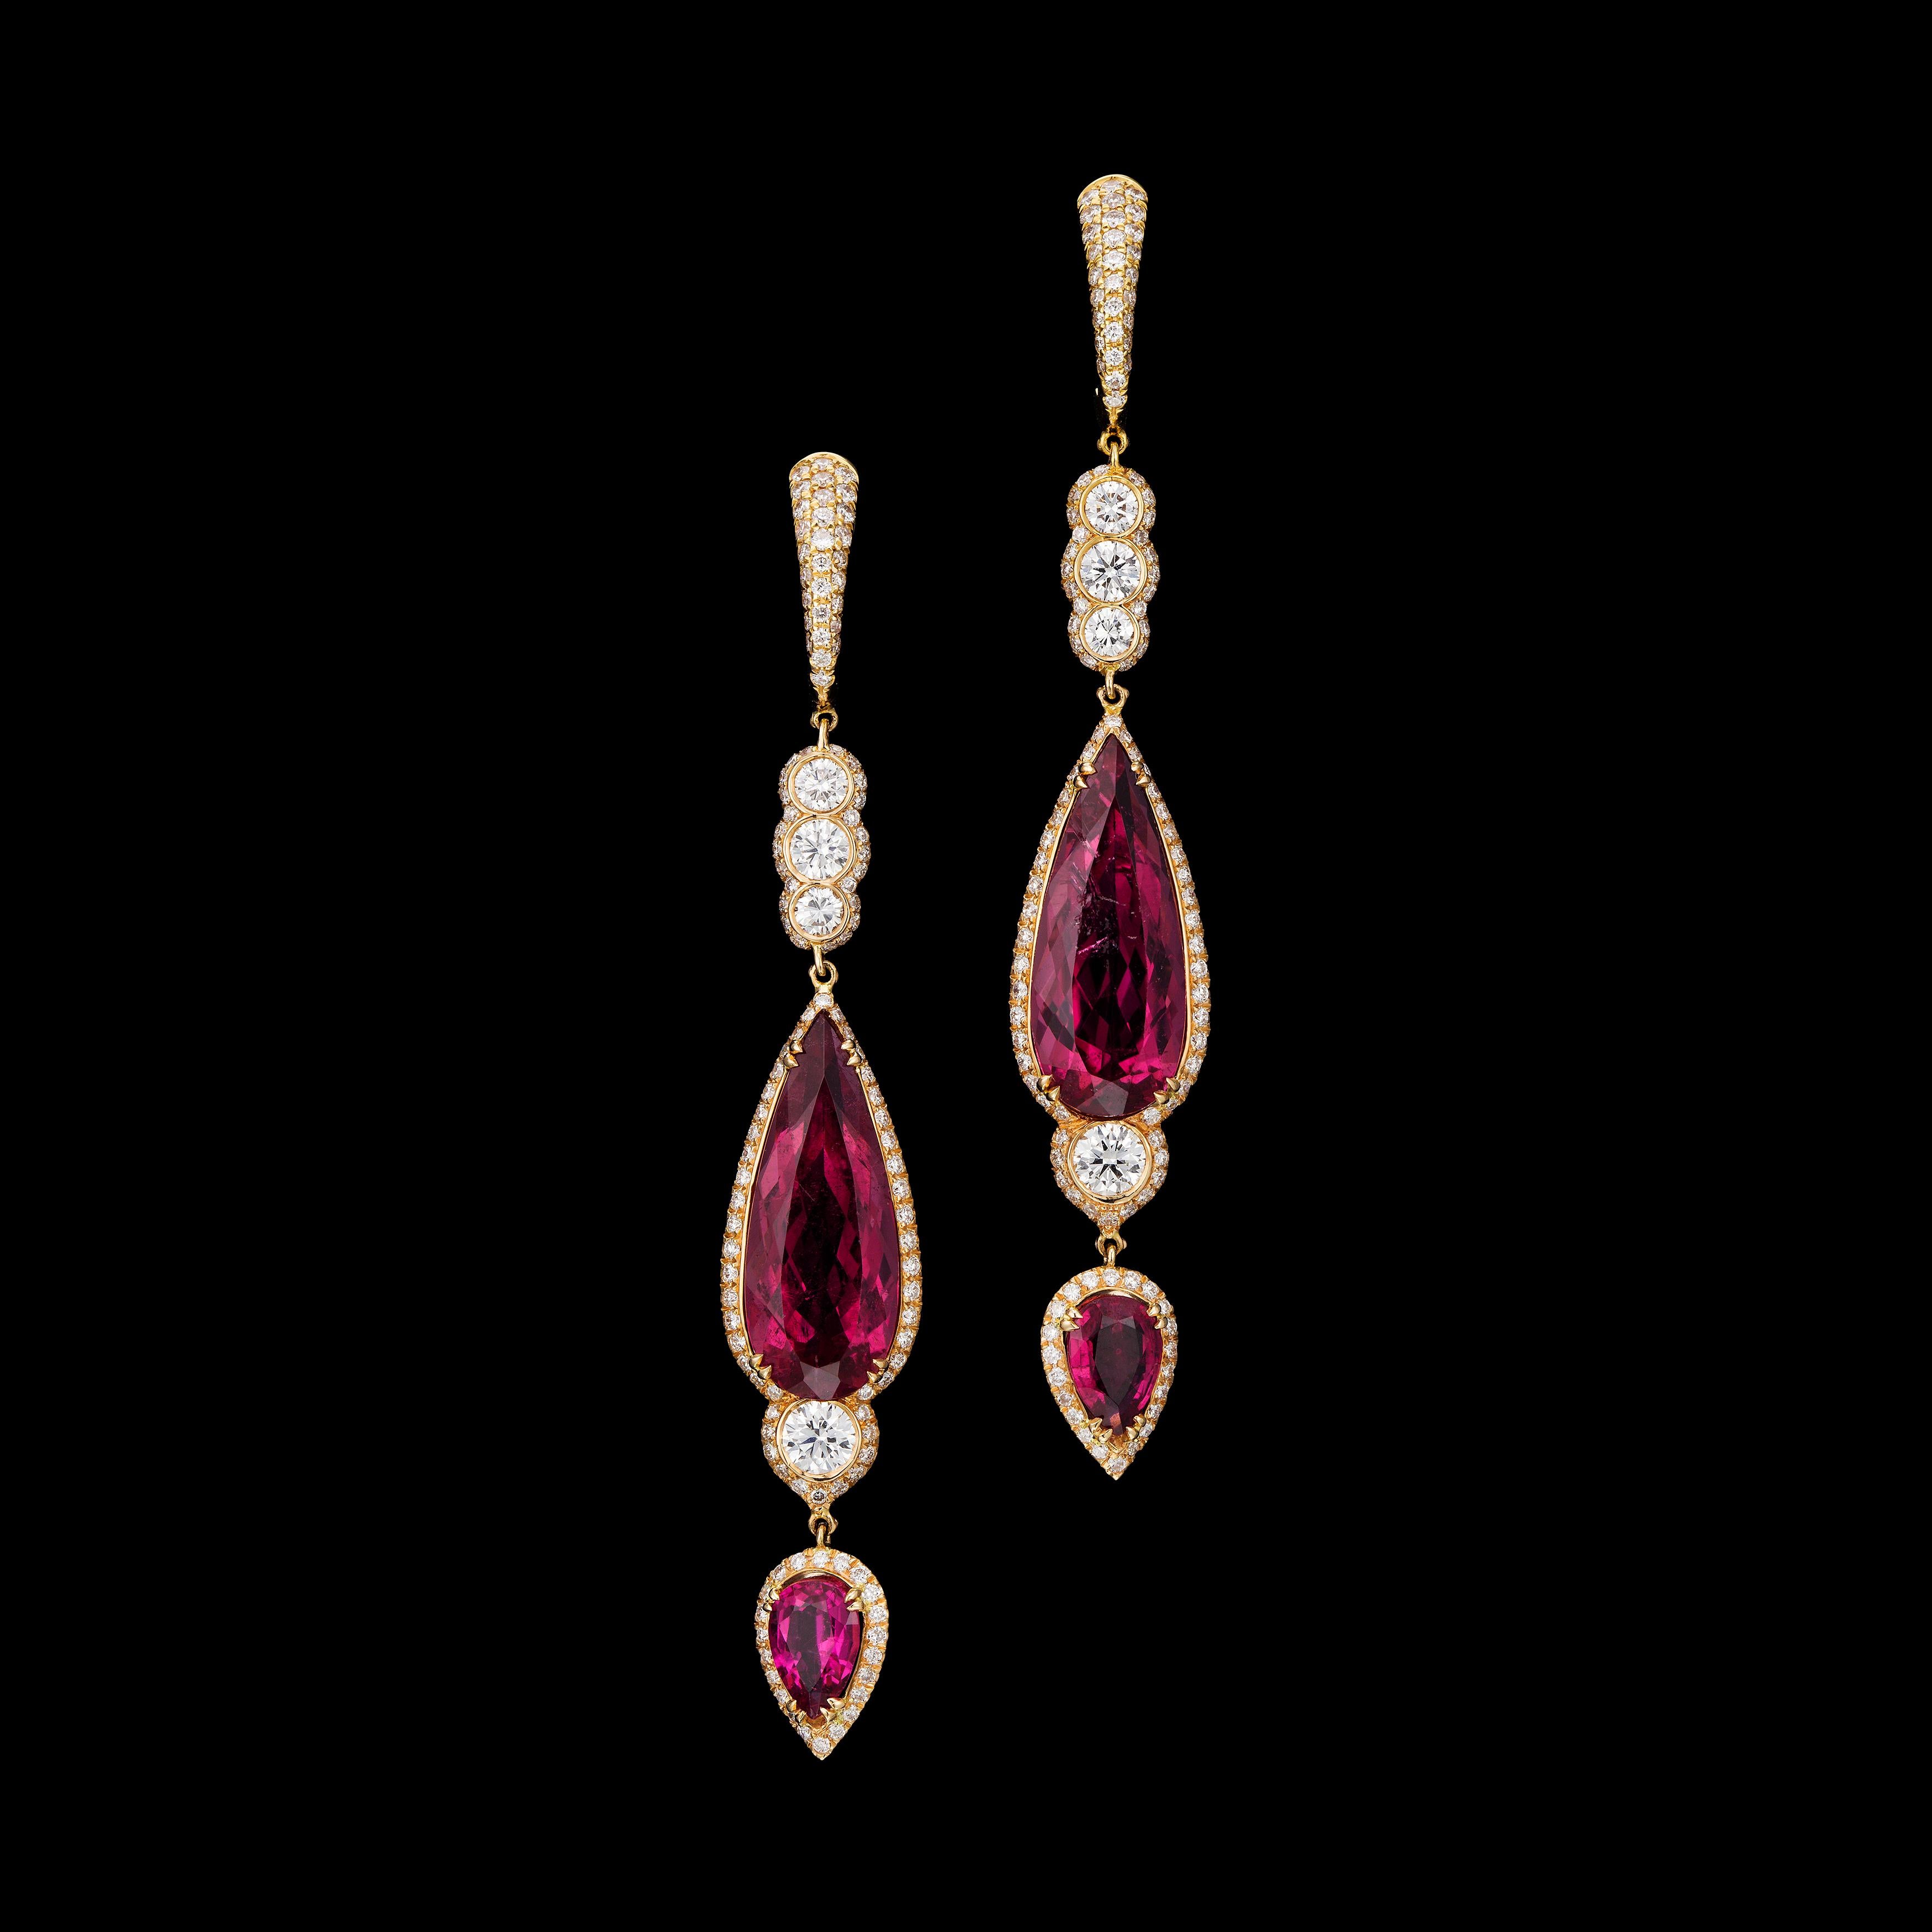 Red tourmaline and diamond dangle earrings in 18k rose gold